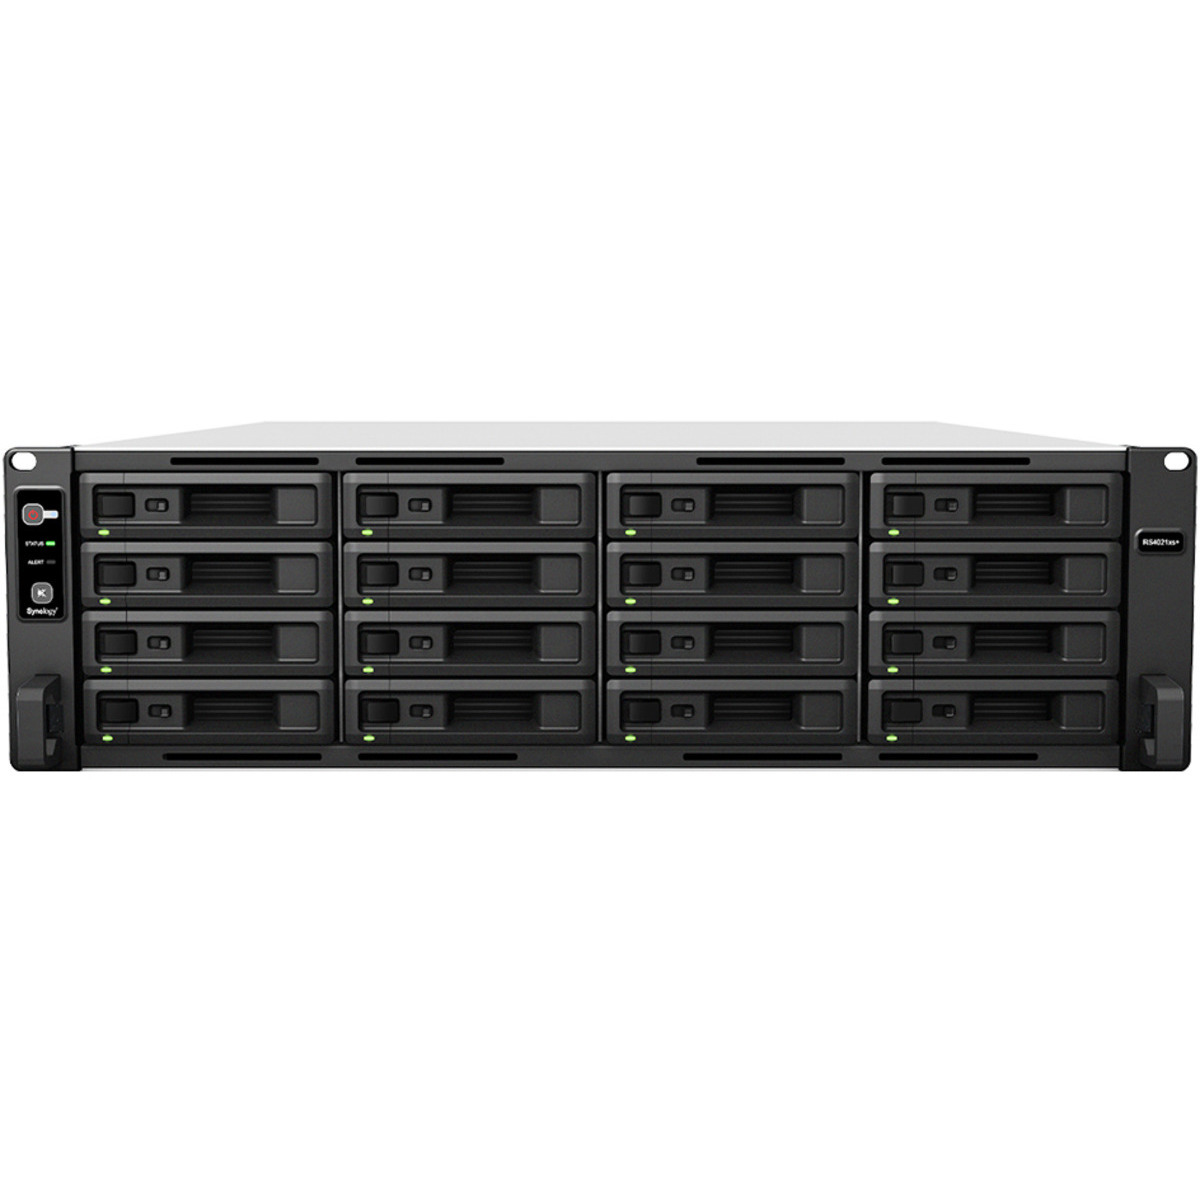 Synology RackStation RS4021xs+ 80tb 16-Bay RackMount Large Business / Enterprise NAS - Network Attached Storage Device 10x8tb Western Digital Gold WD8004FRYZ 3.5 7200rpm SATA 6Gb/s HDD ENTERPRISE Class Drives Installed - Burn-In Tested RackStation RS4021xs+